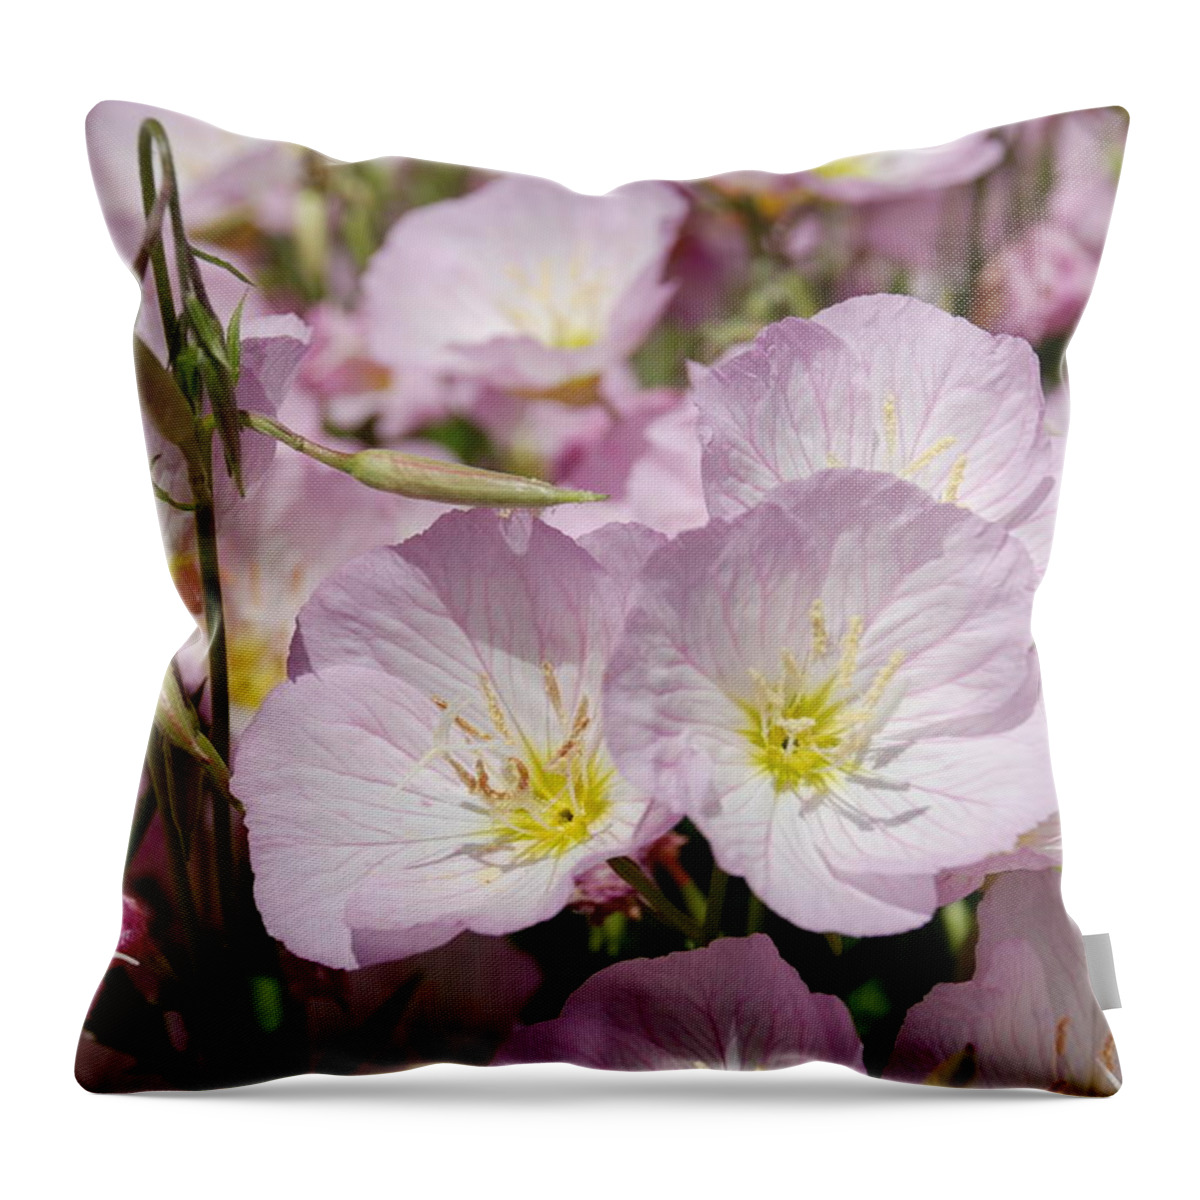 Pink Throw Pillow featuring the photograph Field Of Pink by Devin Rader